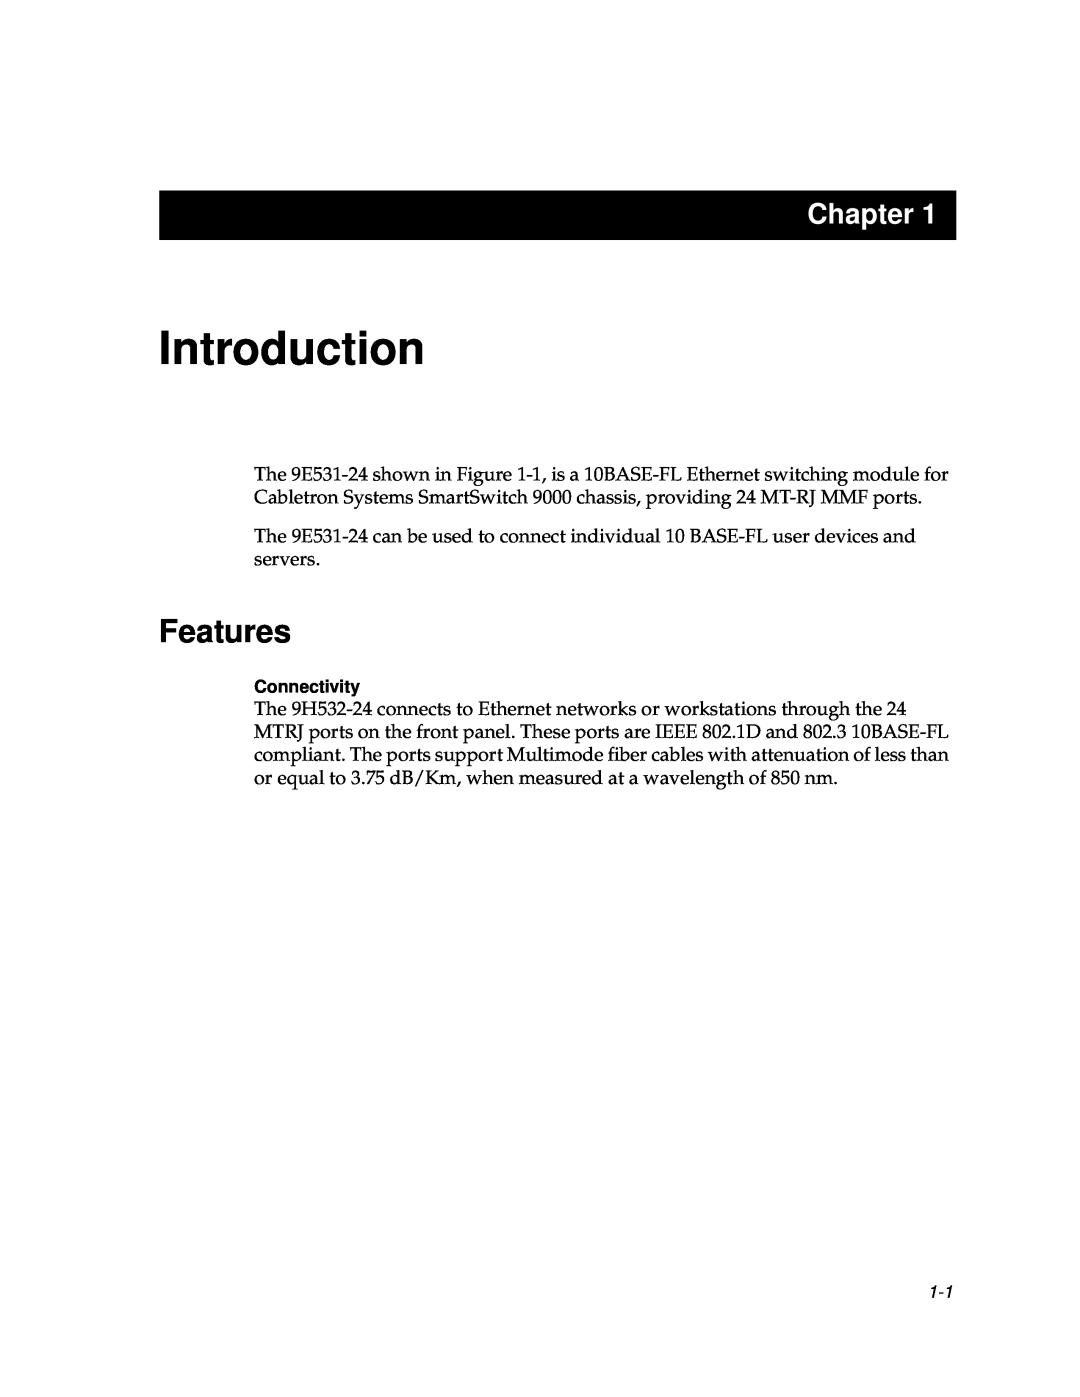 Cabletron Systems 9F122-12, 9F120-08, 9F125-0 manual Introduction, Features, Chapter 